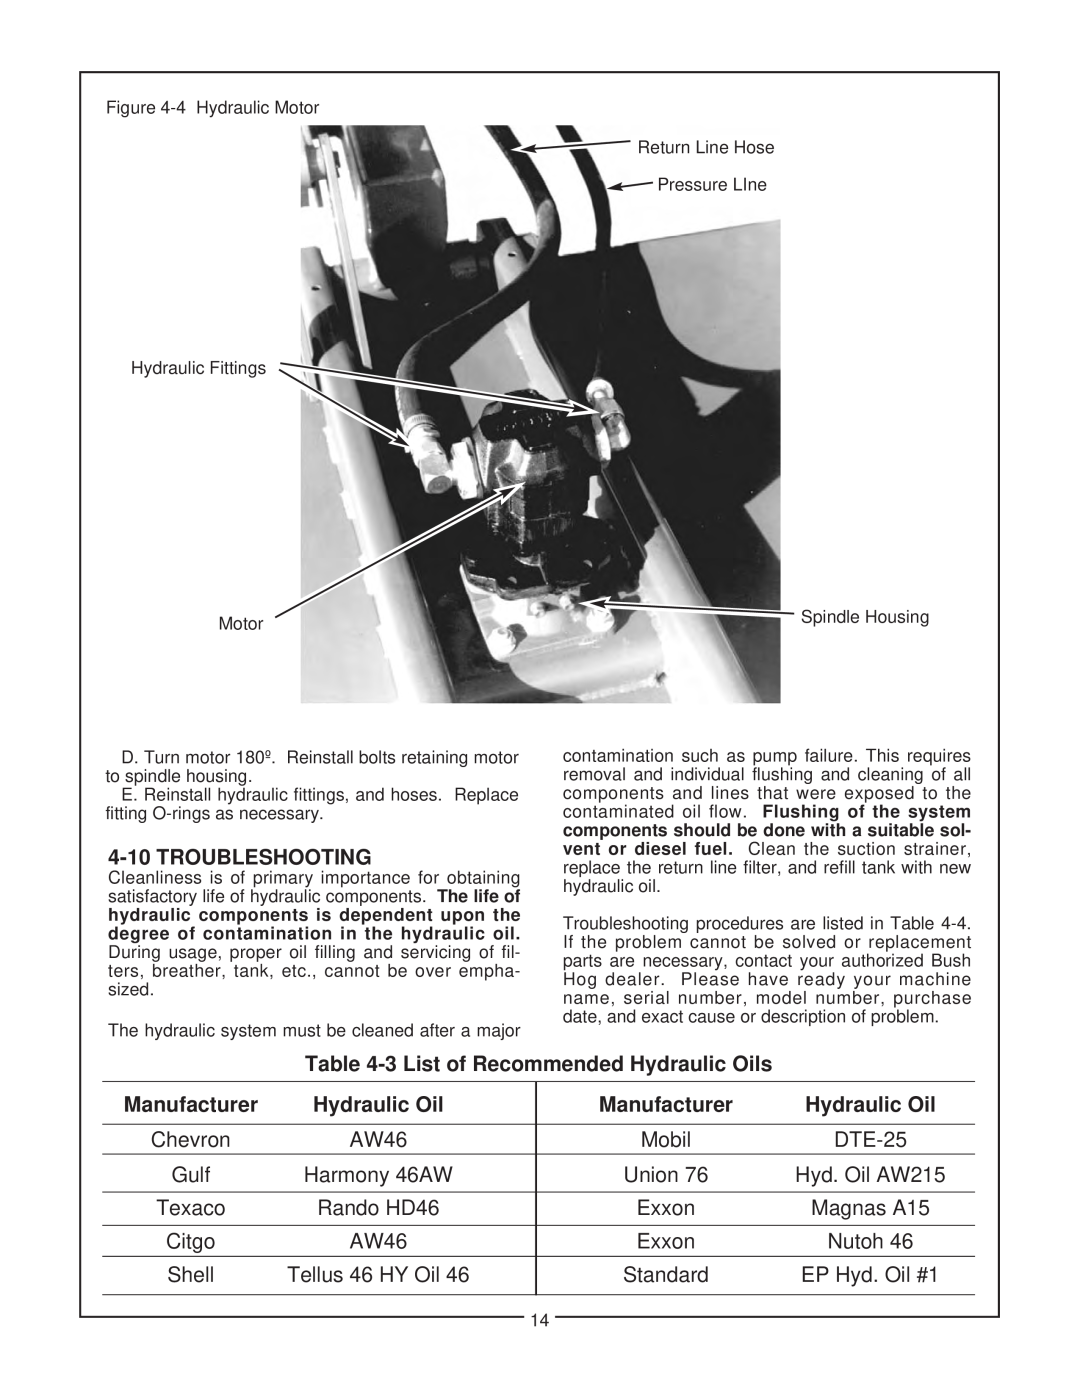 Bush Hog SM 60 manual 4-10TROUBLESHOOTING, 3List of Recommended Hydraulic Oils, Manufacturer 